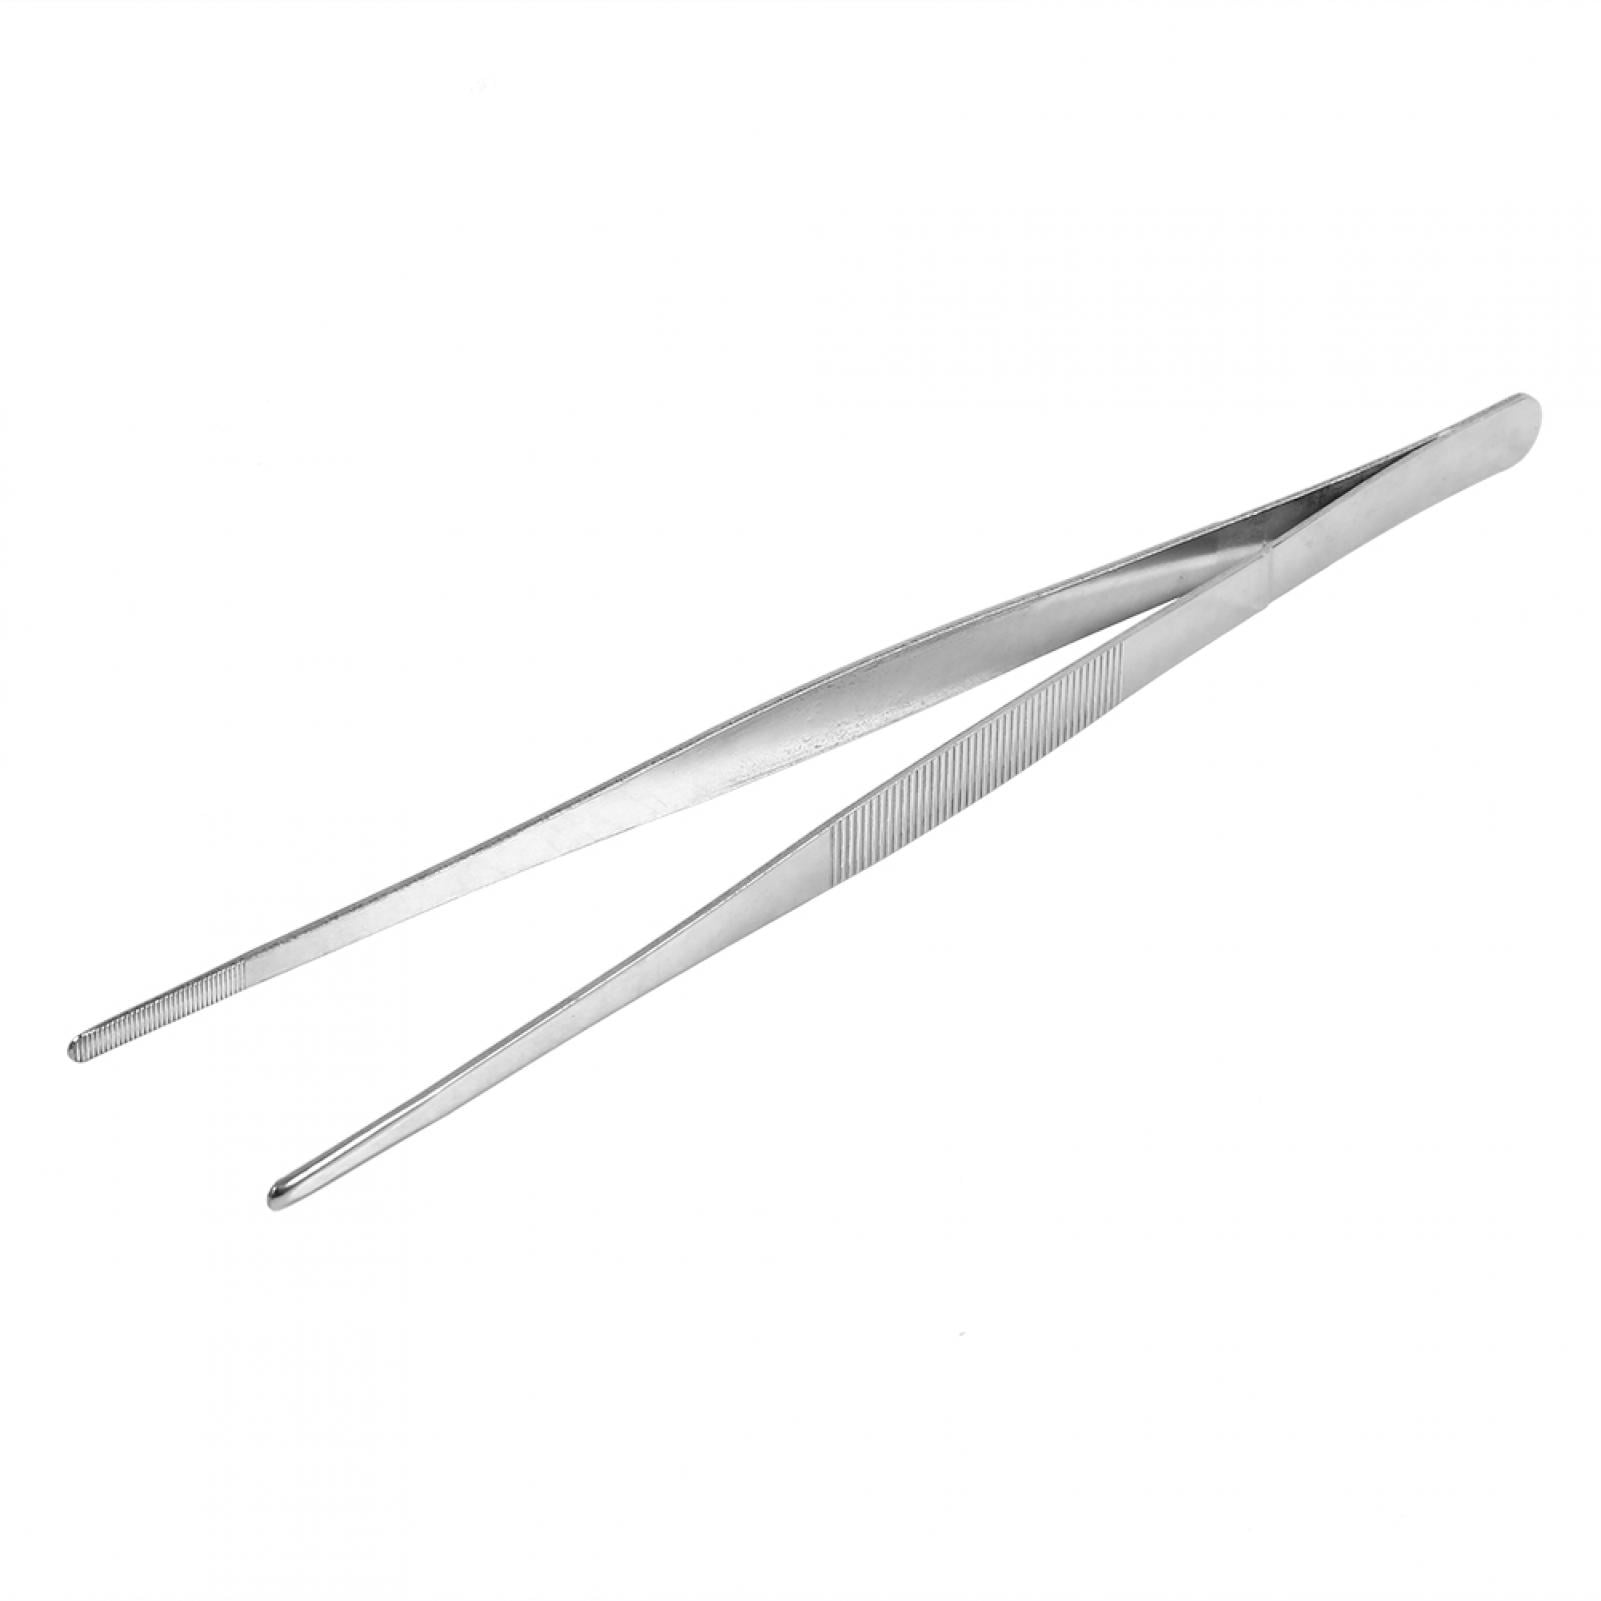 Long Reach Giant Tweezers 12 inch Serrated Round Points Grasping Pickup Tool